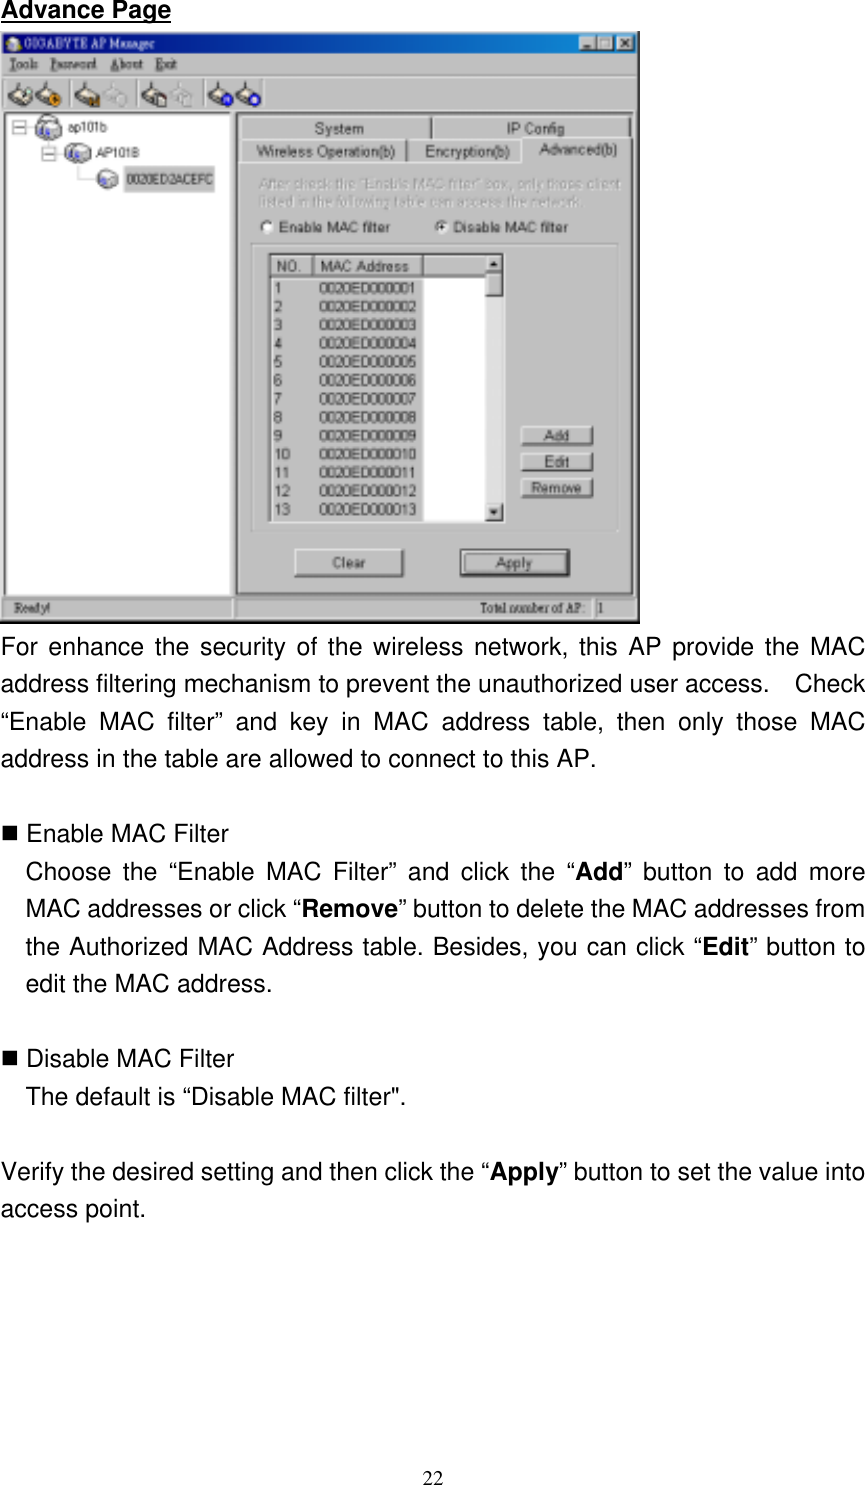 22  Advance Page  For enhance the security of the wireless network, this AP provide the MAC address filtering mechanism to prevent the unauthorized user access.    Check “Enable MAC filter” and key in MAC address table, then only those MAC address in the table are allowed to connect to this AP.   Enable MAC Filter   Choose the “Enable MAC Filter” and click the “Add” button to add more MAC addresses or click “Remove” button to delete the MAC addresses from the Authorized MAC Address table. Besides, you can click “Edit” button to edit the MAC address.     Disable MAC Filter     The default is “Disable MAC filter&quot;.  Verify the desired setting and then click the “Apply” button to set the value into access point. 